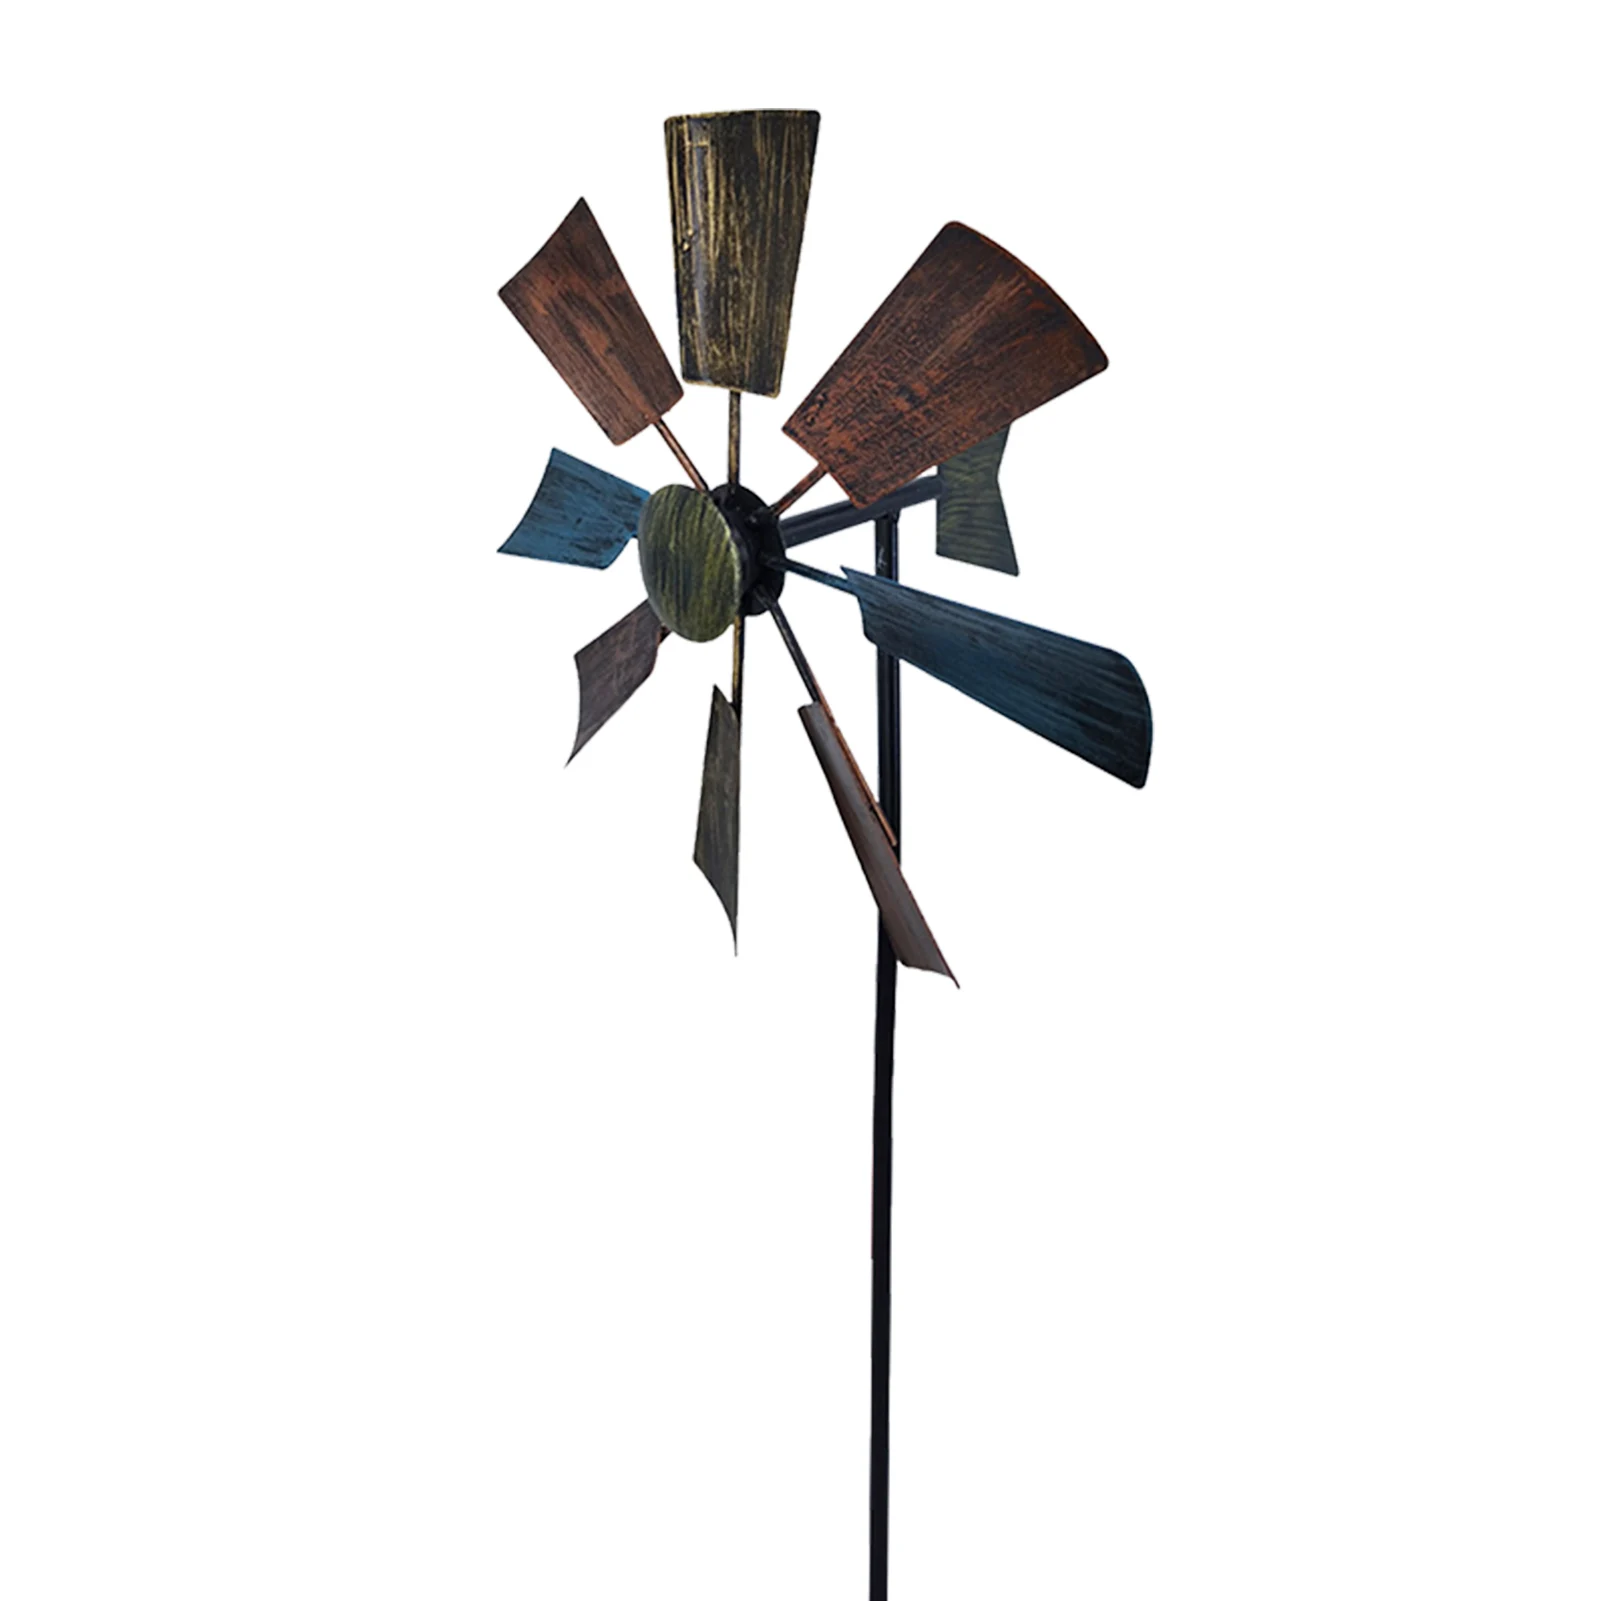 

Gift Metal Wind Spinner Garden Windmill Patio DIY Tool Outdoor Decor Whirligig With Stake Ornament Lawn Durable Backyard